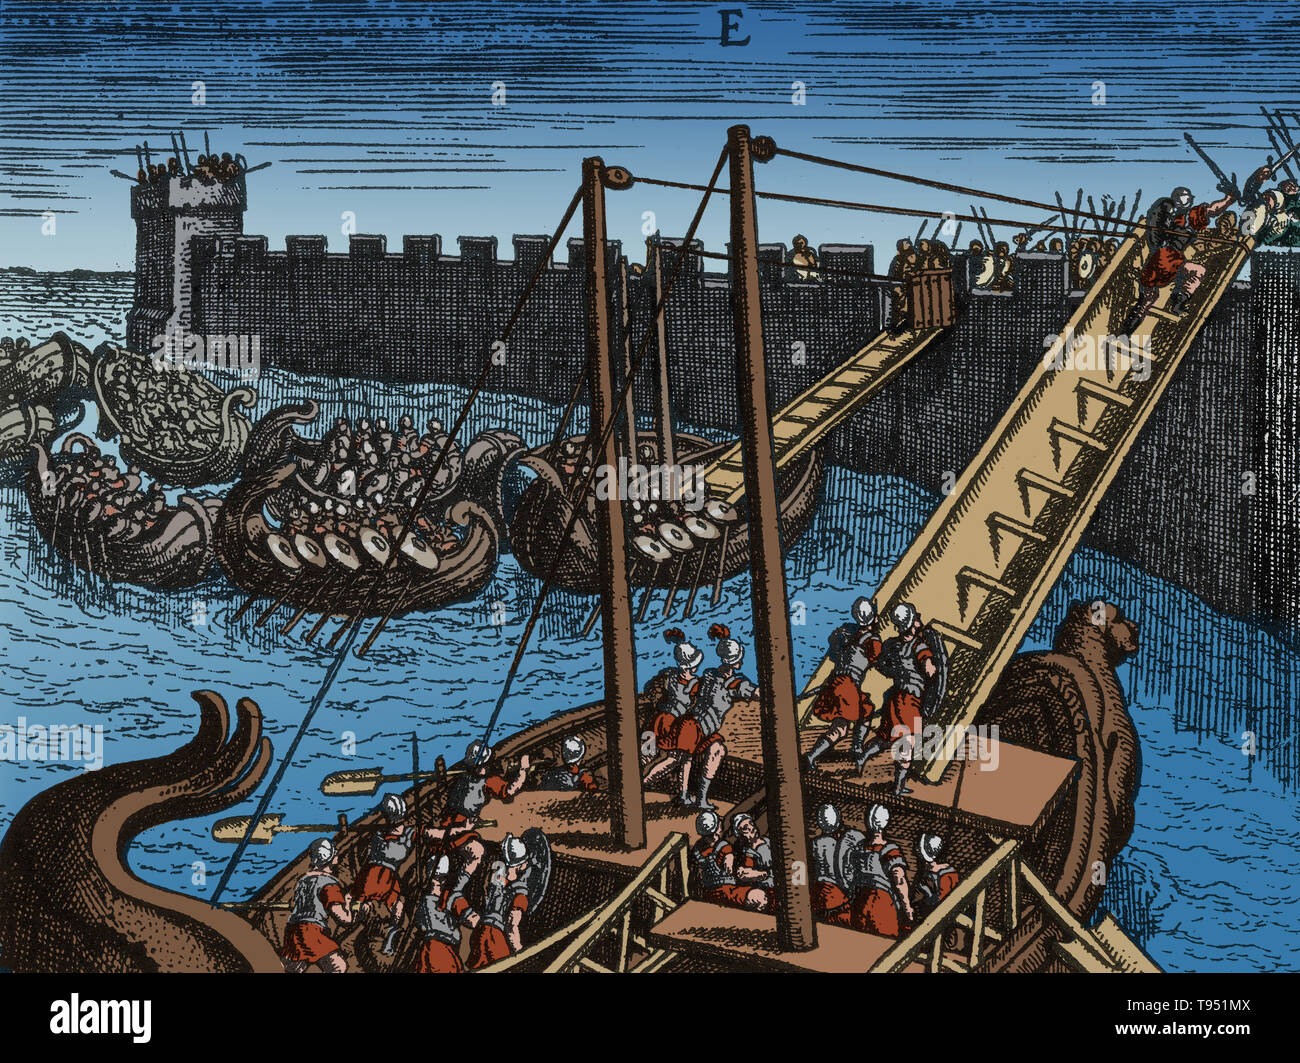 Roman soldiers scaling the walls of a fortress using ladders mounted on boats. Image taken from 'Poliorceticon sive de machinis tormentis telis' by Justus Lipsius (Joost Lips), 1602 edition. The Romans designed weaponry that both gave some protection to their men but also were designed to smash into fortifications. Siege towers were used to get troops over an enemy curtain wall. When a siege tower was near a wall, it would drop a gangplank between it and the wall. Stock Photo